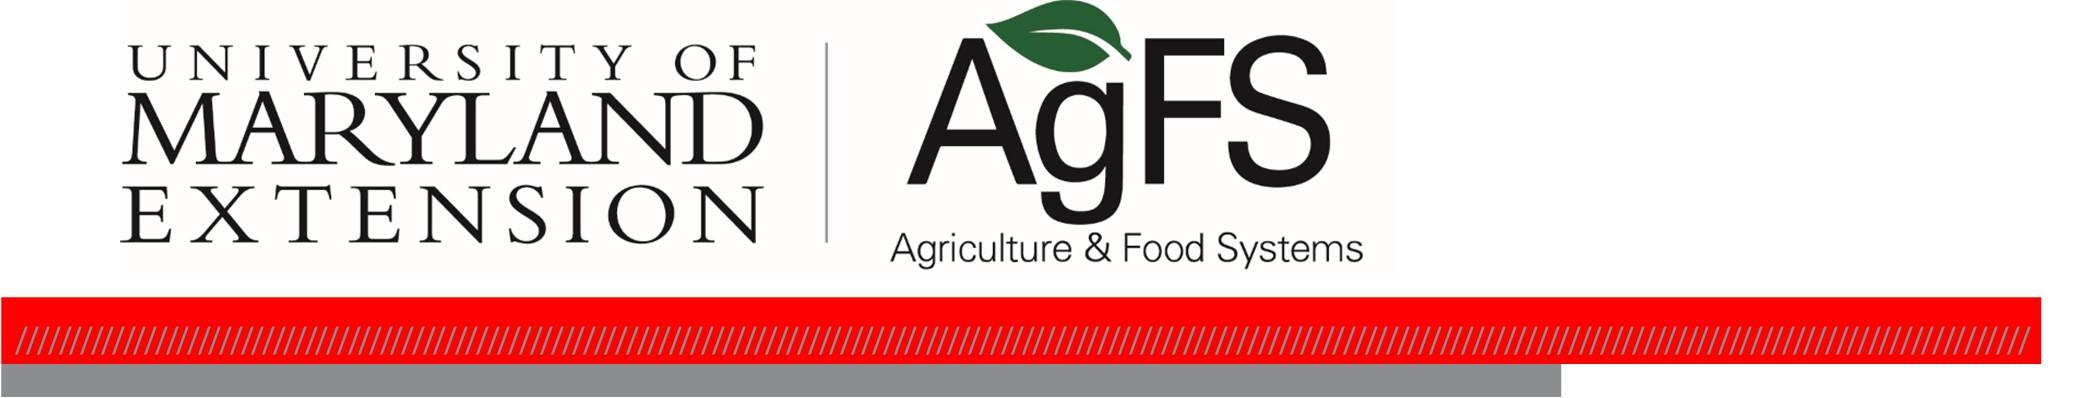 Factsheet header that contains the University of Maryland Extension and Agriculture and Food Systems logos